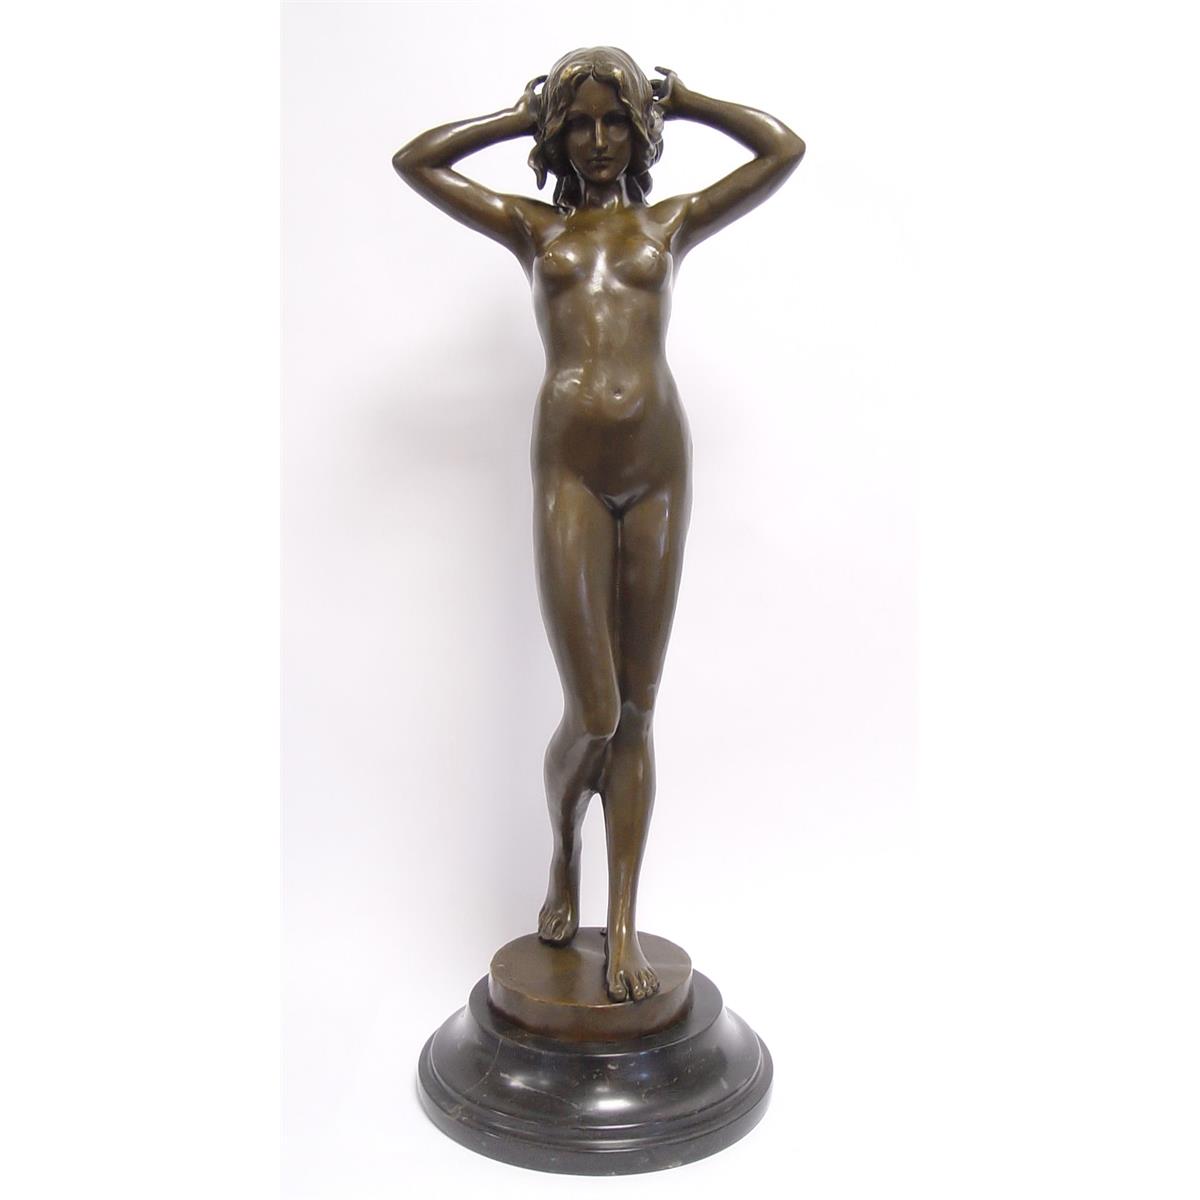 A BRONZE SCULPTURE CALLED FIRST SHIVER / NUDE